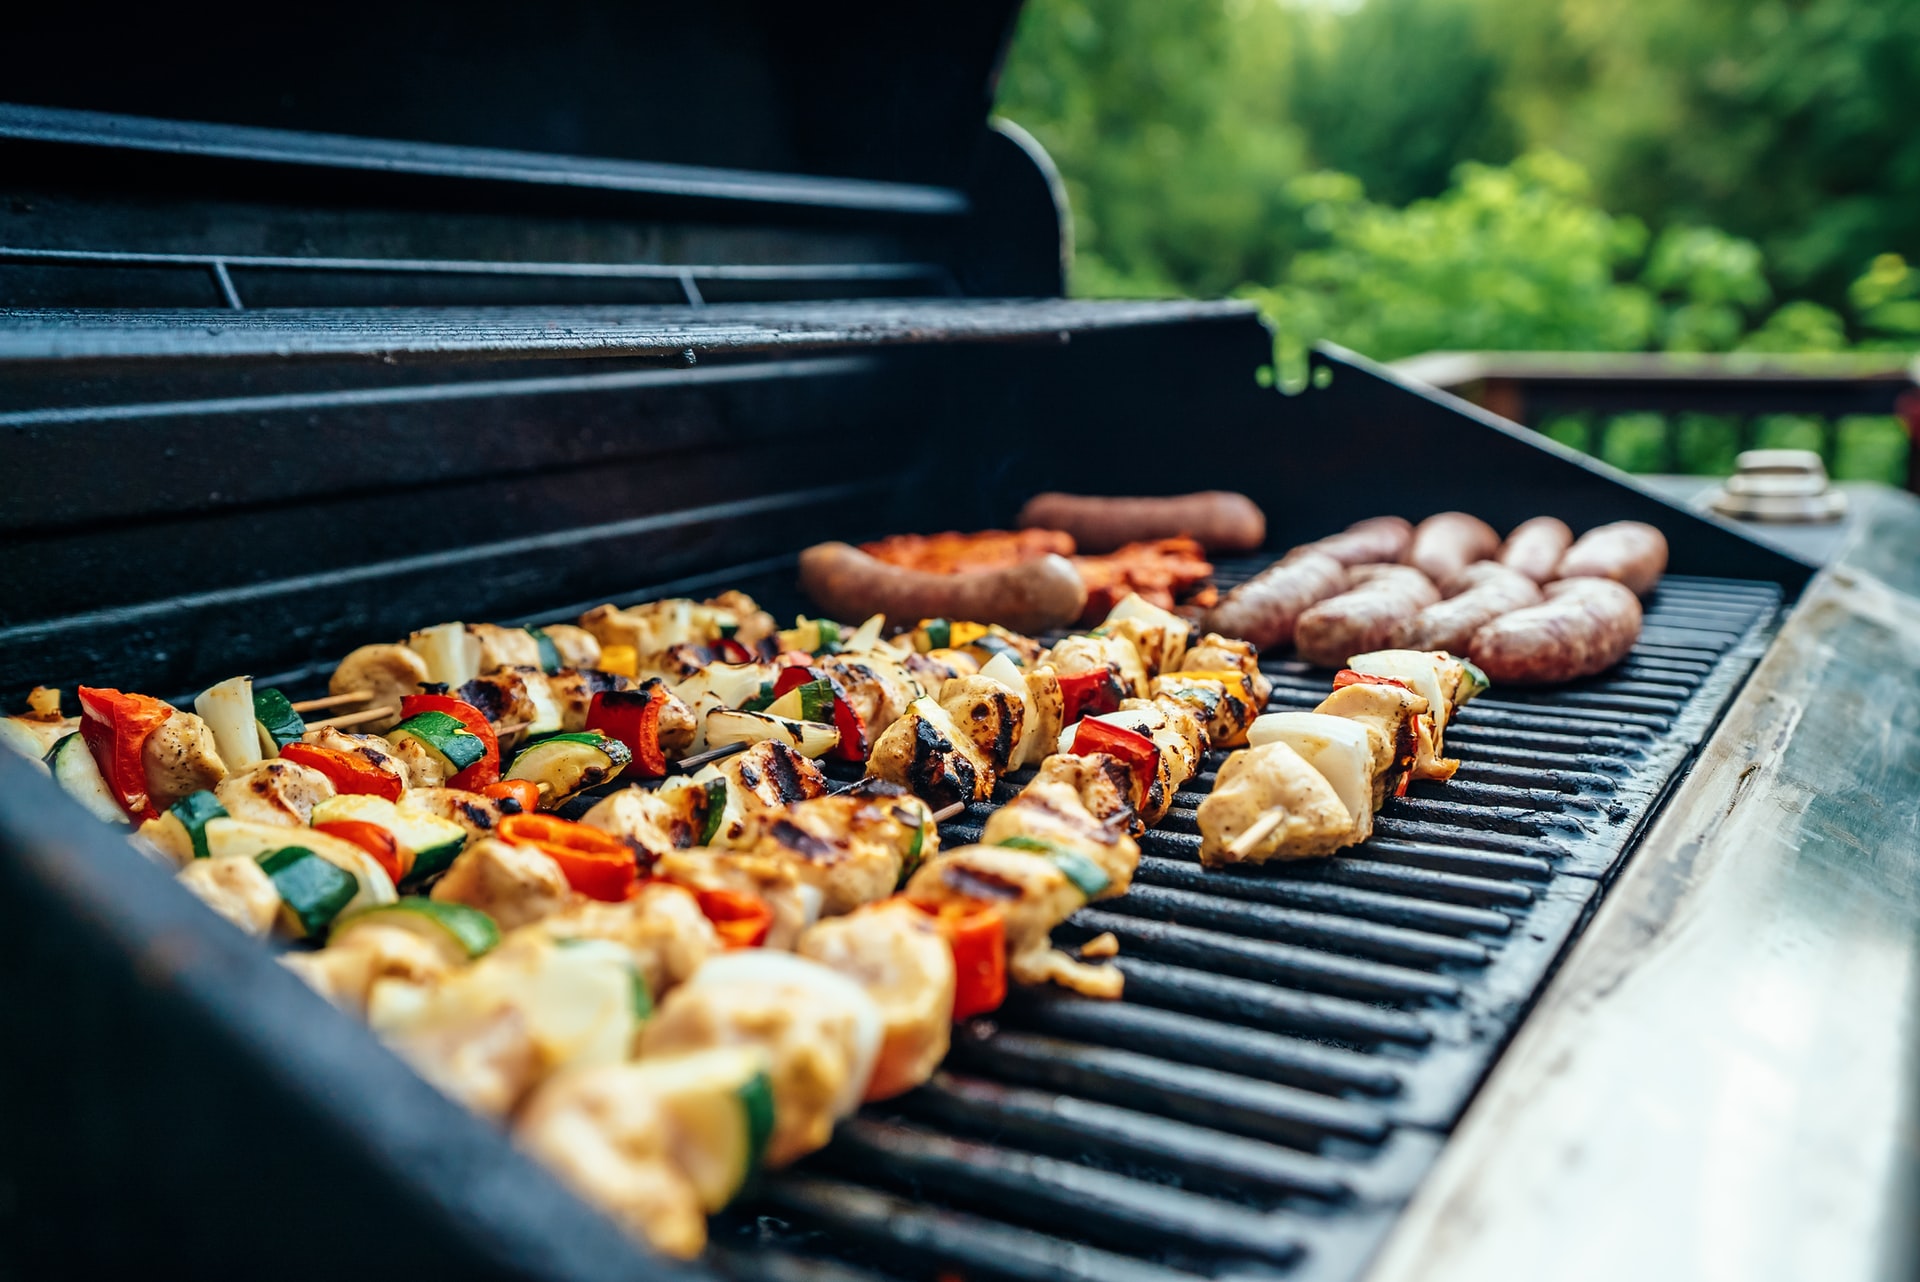 BBQ food is a staple at garden parties